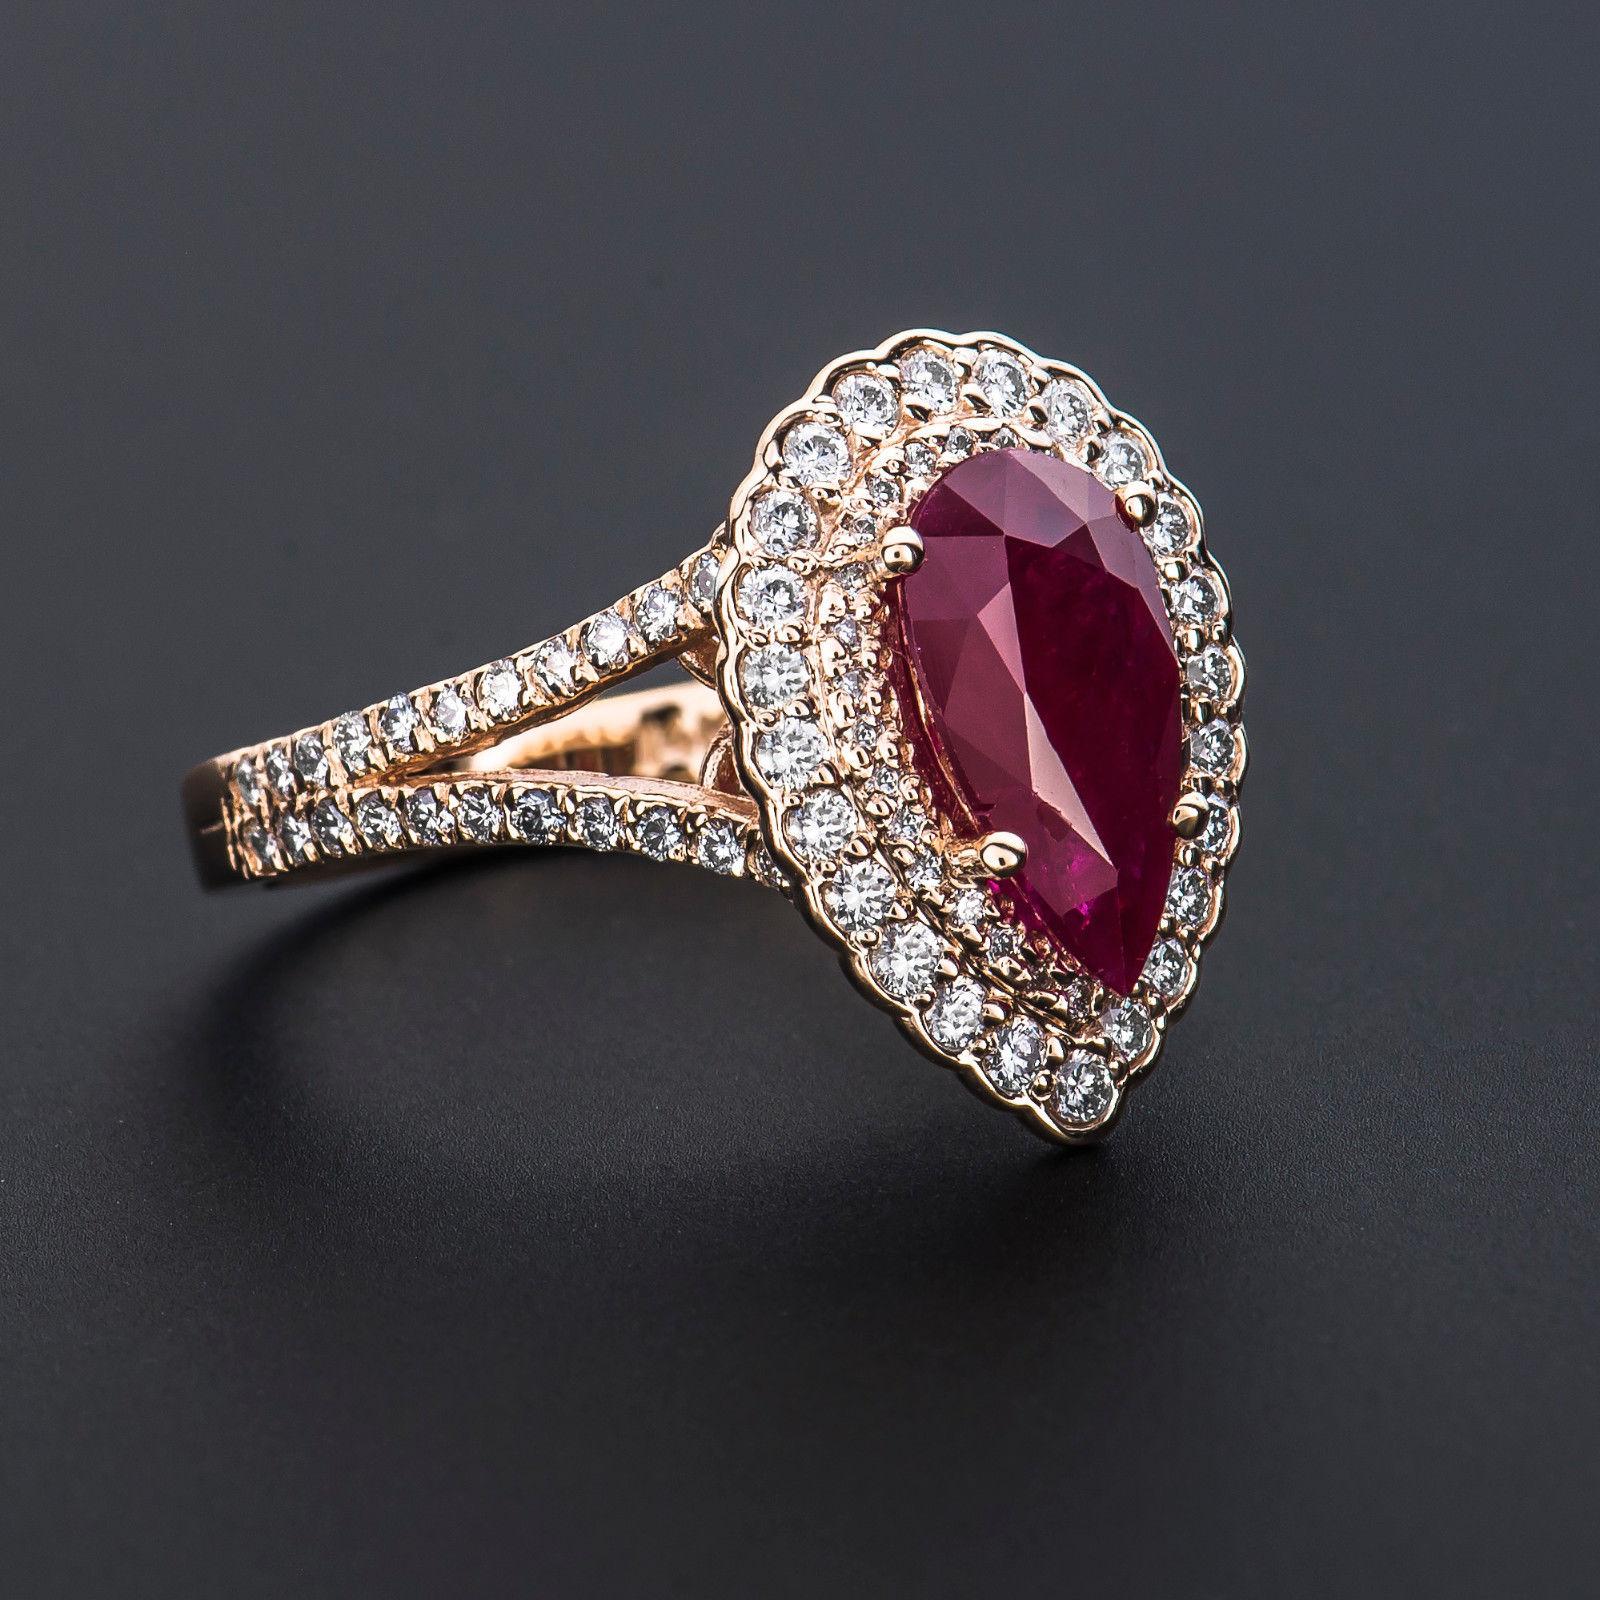 2.71 Carat Pear Shape Ruby with 0.96 Carat Round Brilliant Diamonds in Halo Ring Damen